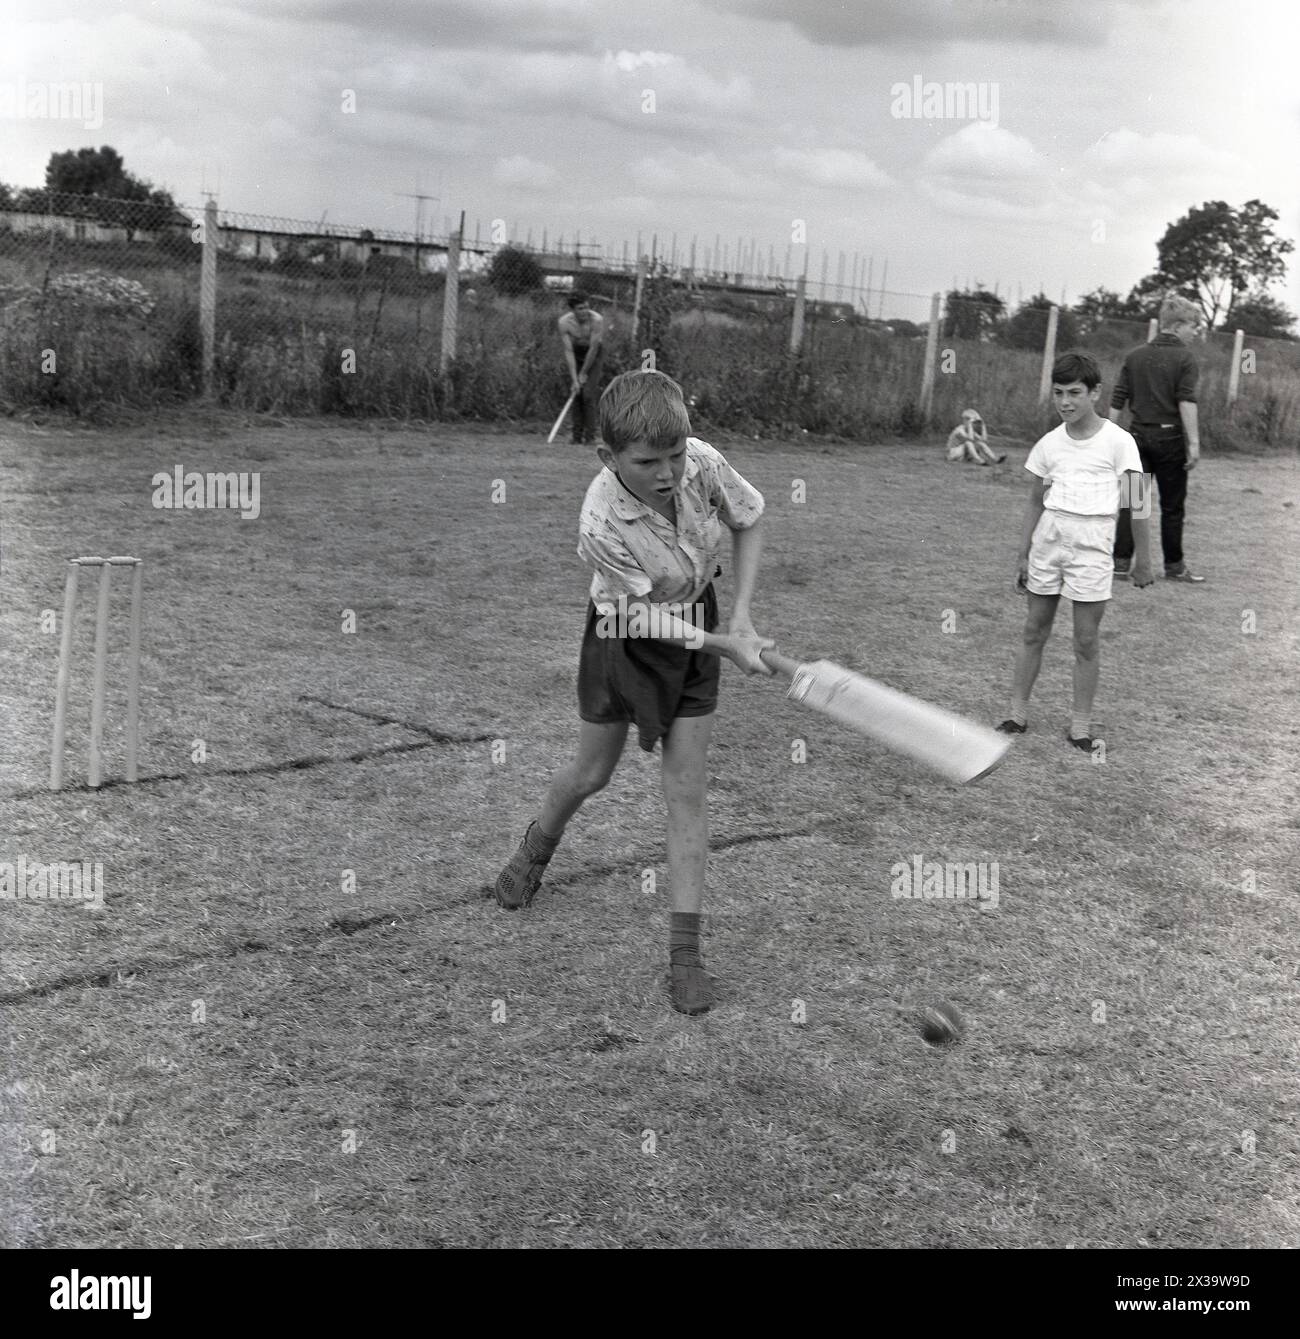 1960s, historical, outside in a field, a young boy playing cricket, concentration and effort, as infront of the stumps, he puts bat onto ball, England, UK. Stock Photo